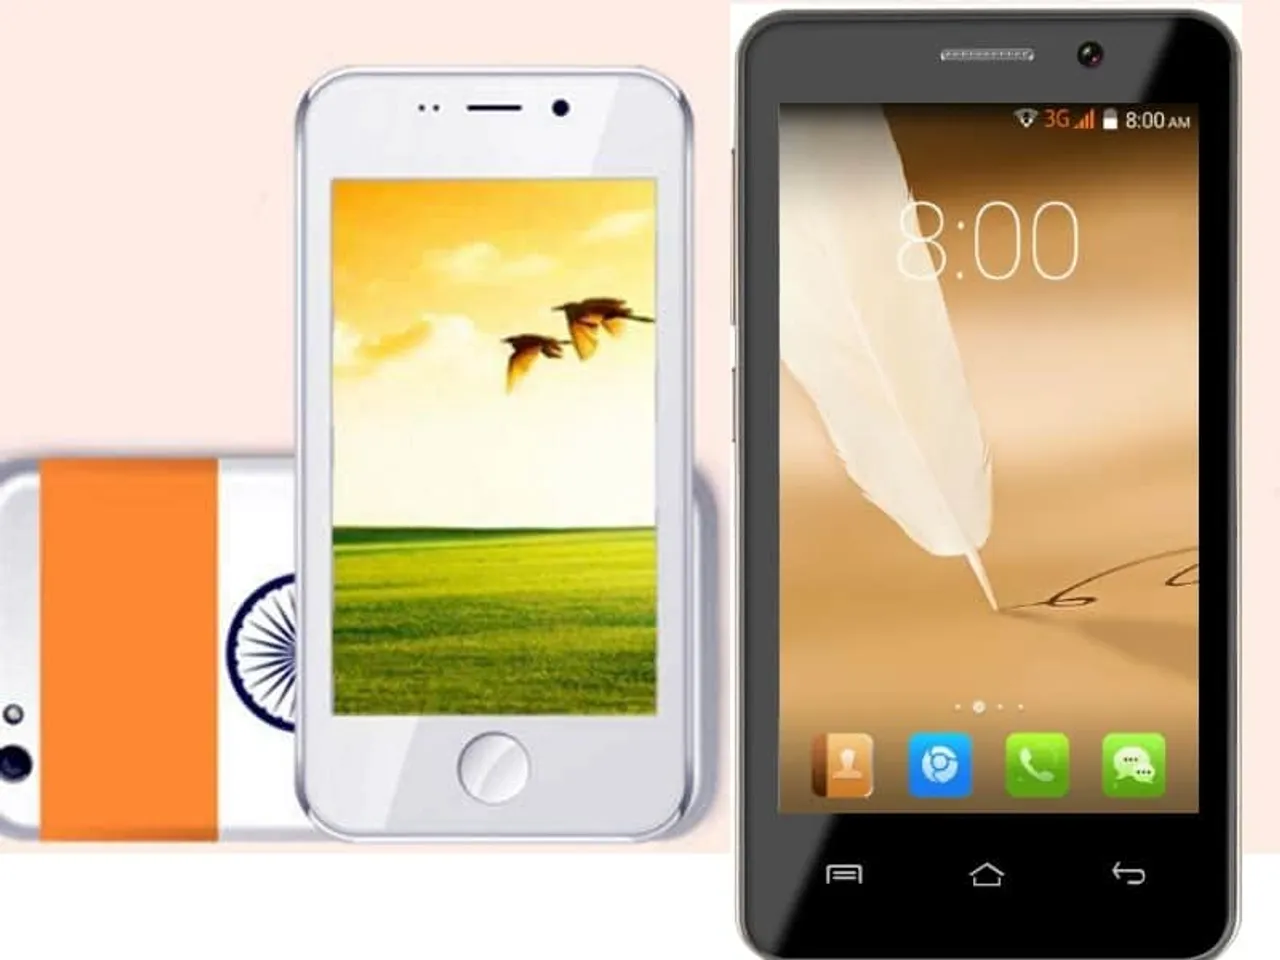 Docoss Android Smart Phone Launched